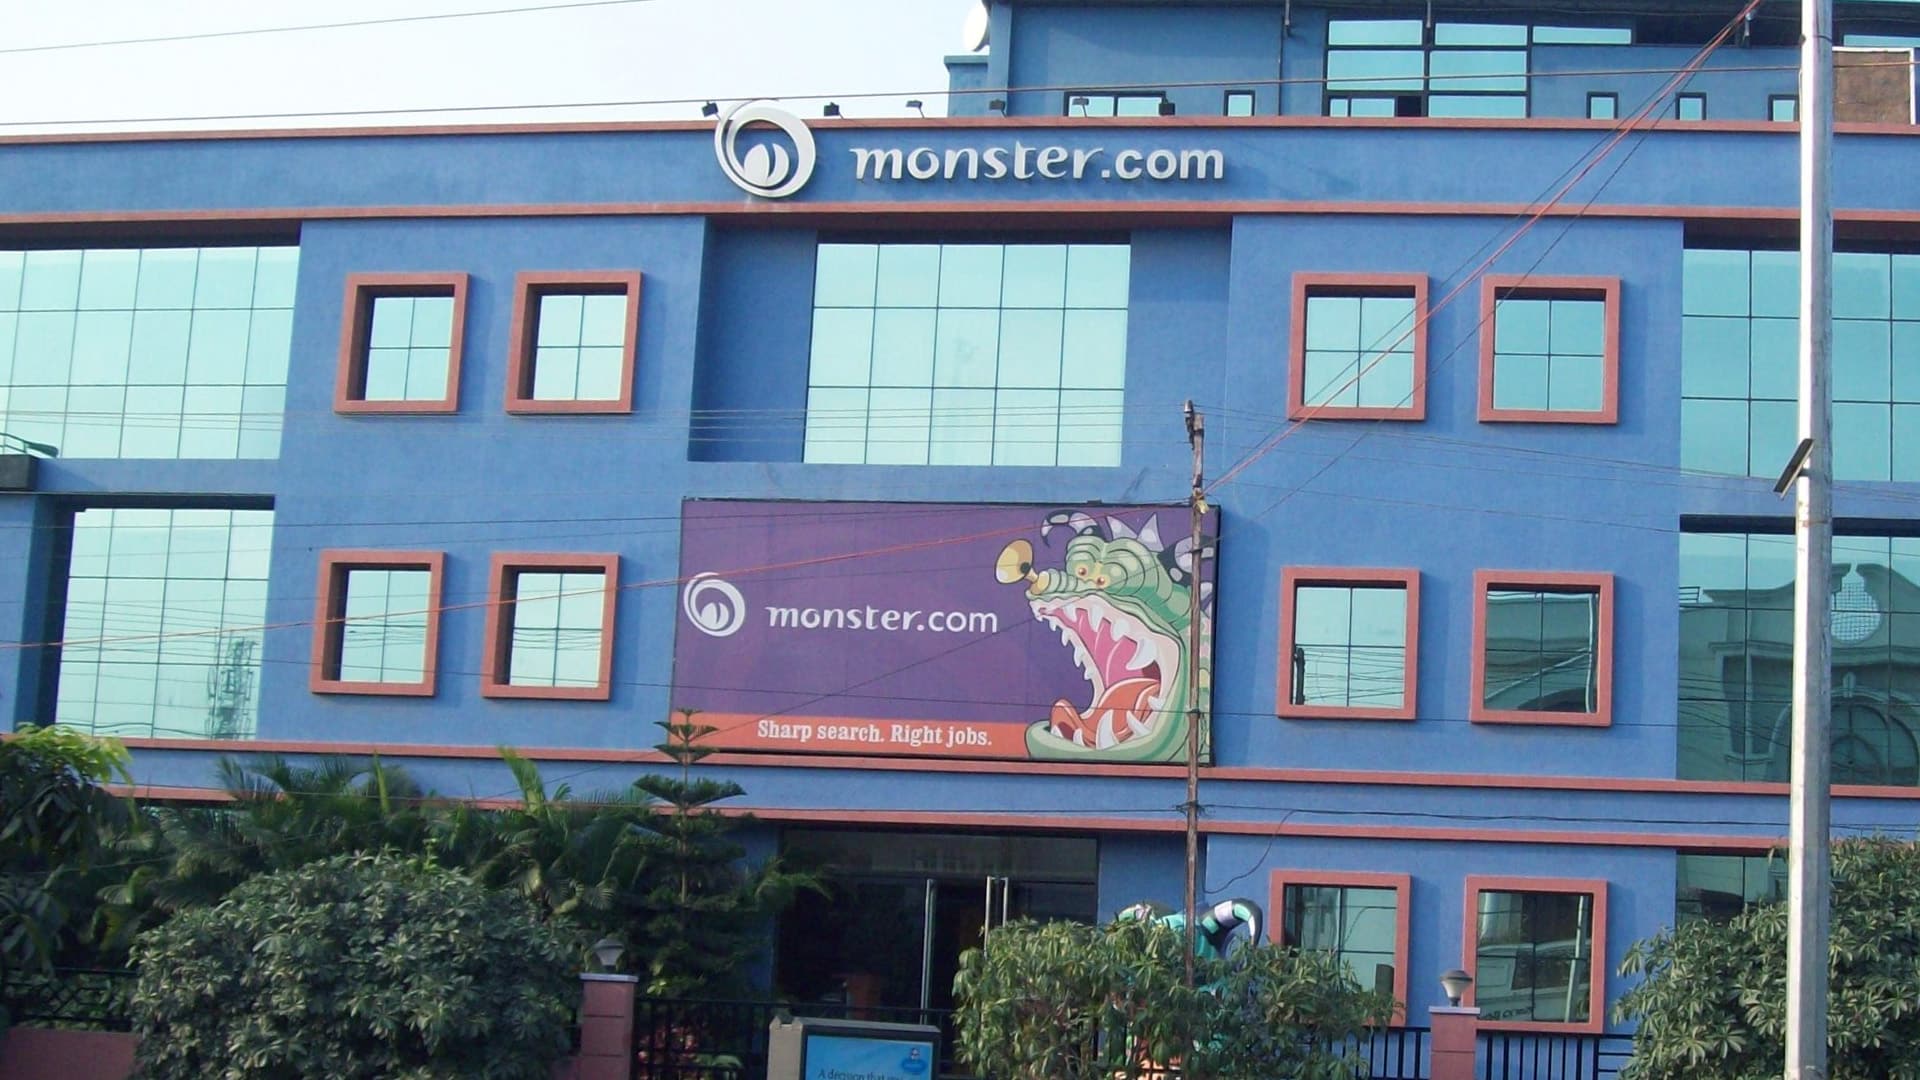 Monster.com raises about Rs 137 crore in funding led by Akash Bhanshali, Mohandas Pai